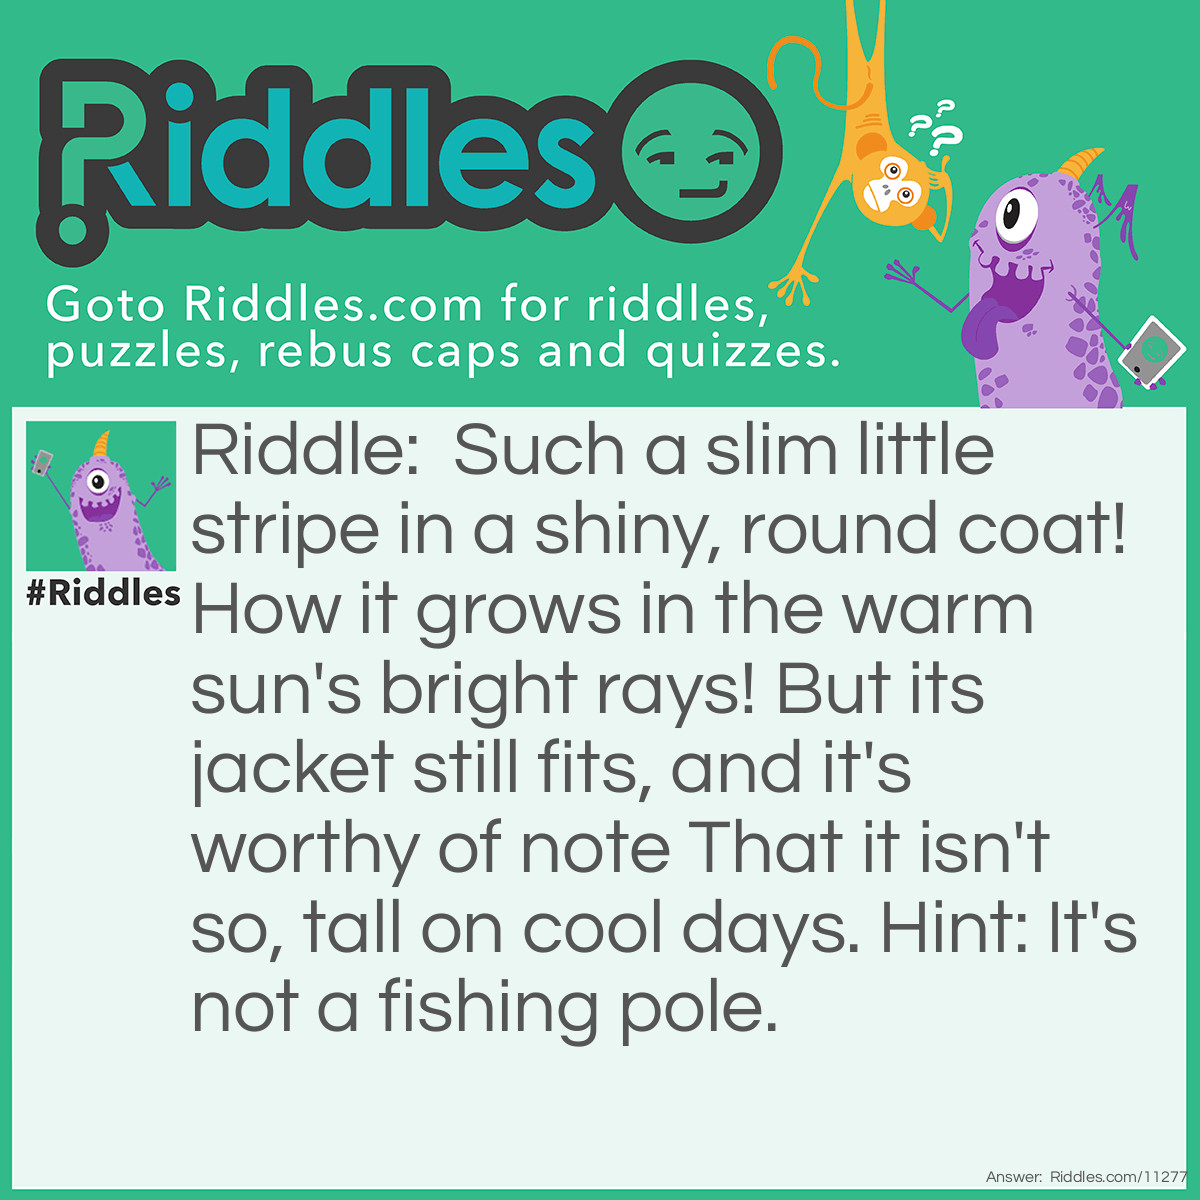 Riddle: Such a slim little stripe in a shiny, round coat! How it grows in the warm sun's bright rays! But its jacket still fits, and it's worthy of note That it isn't so, tall on cool days. Hint: It's not a fishing pole. Answer: A Thermometer.